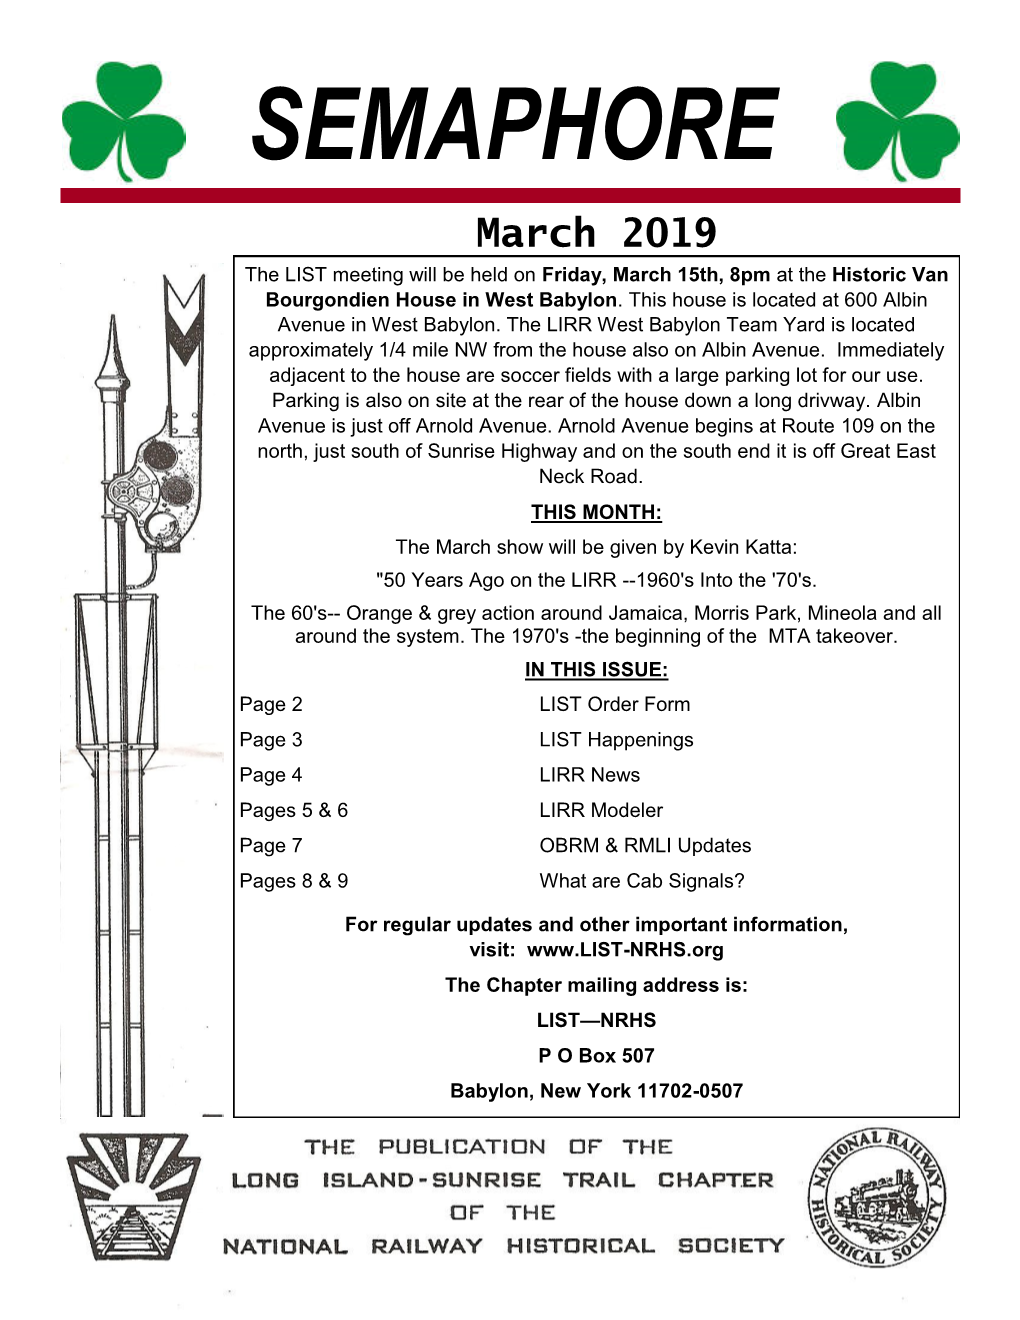 SEMAPHORE March 2019 the LIST Meeting Will Be Held on Friday, March 15Th, 8Pm at the Historic Van Bourgondien House in West Babylon